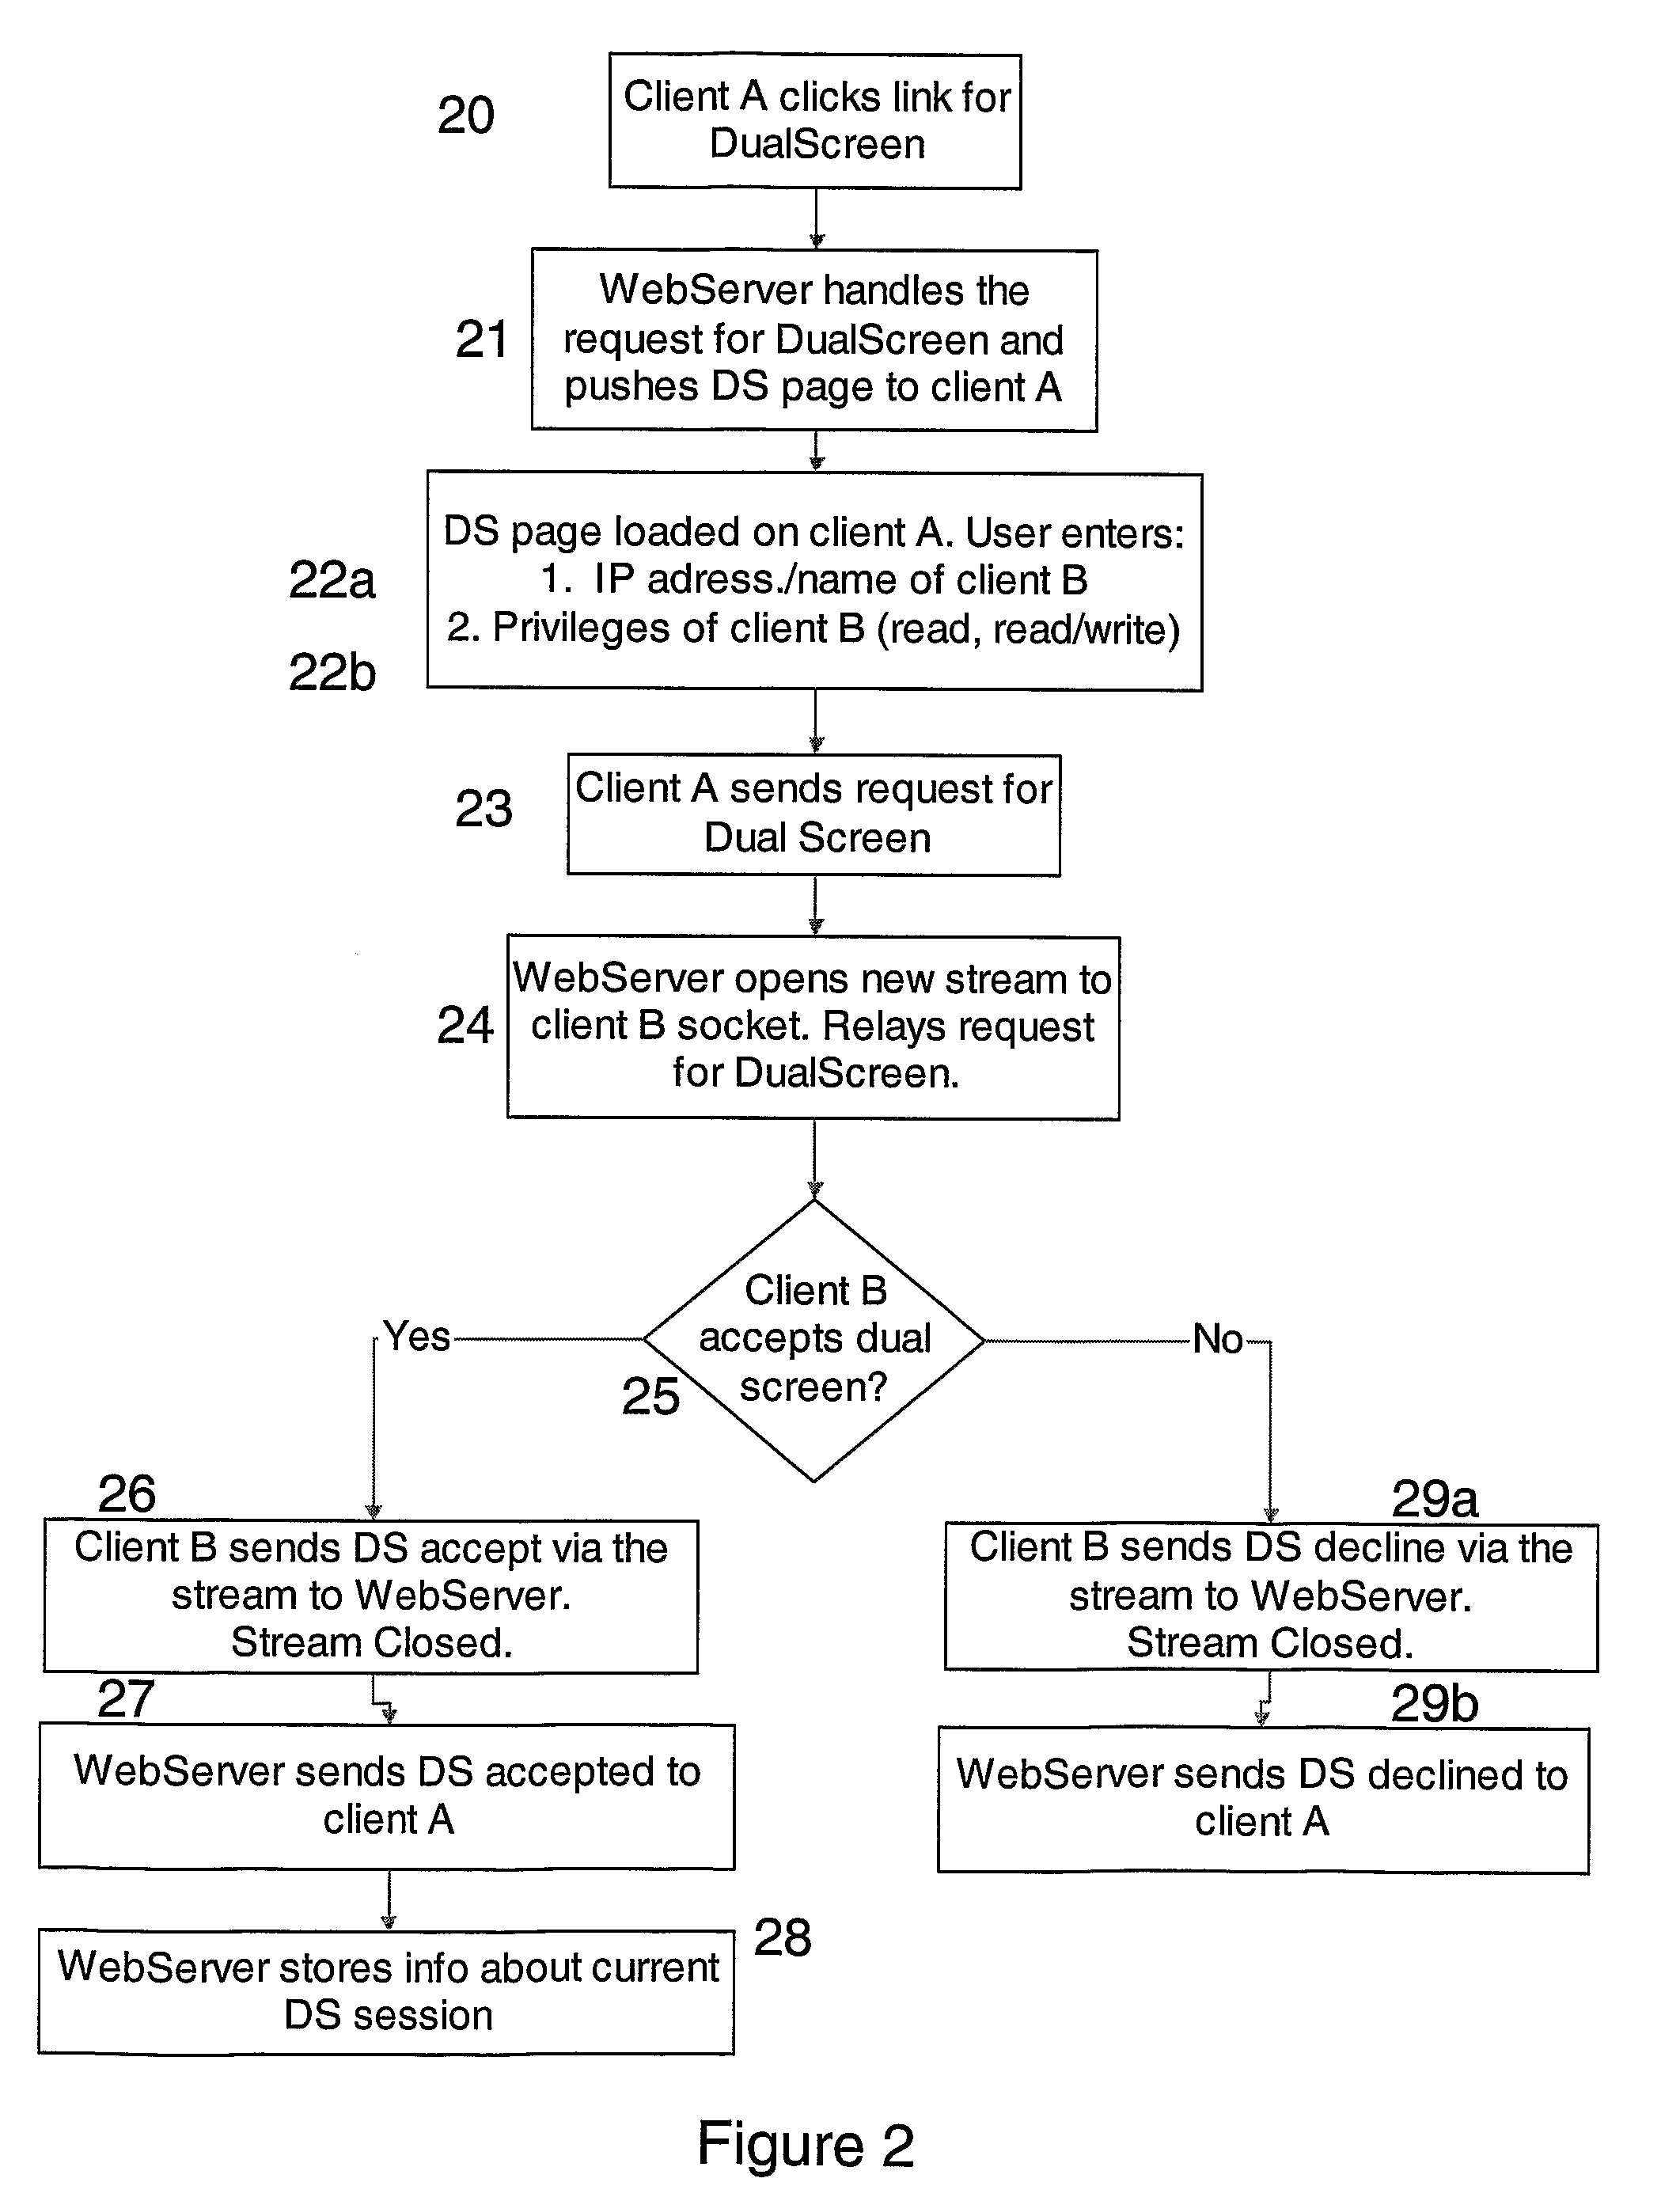 Method for Displaying Data in an Industrial Control System